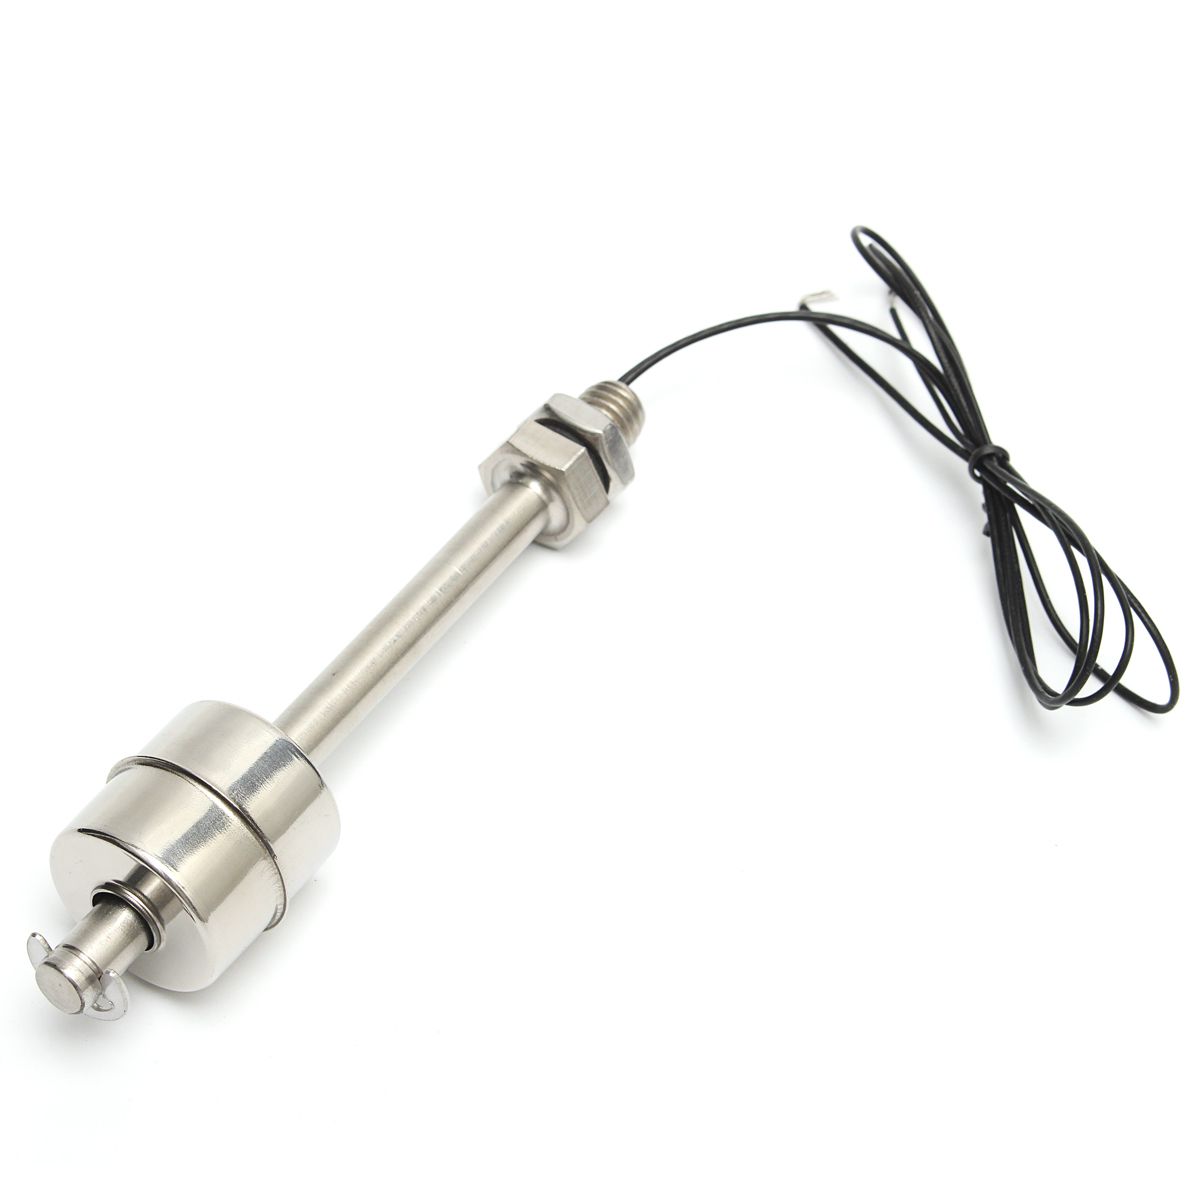 109mm-Stainless-Steel-Water-Level-Sensor-Liquid-Vertical-Float-Switch-for-Hydroponics-Gardening-1171139